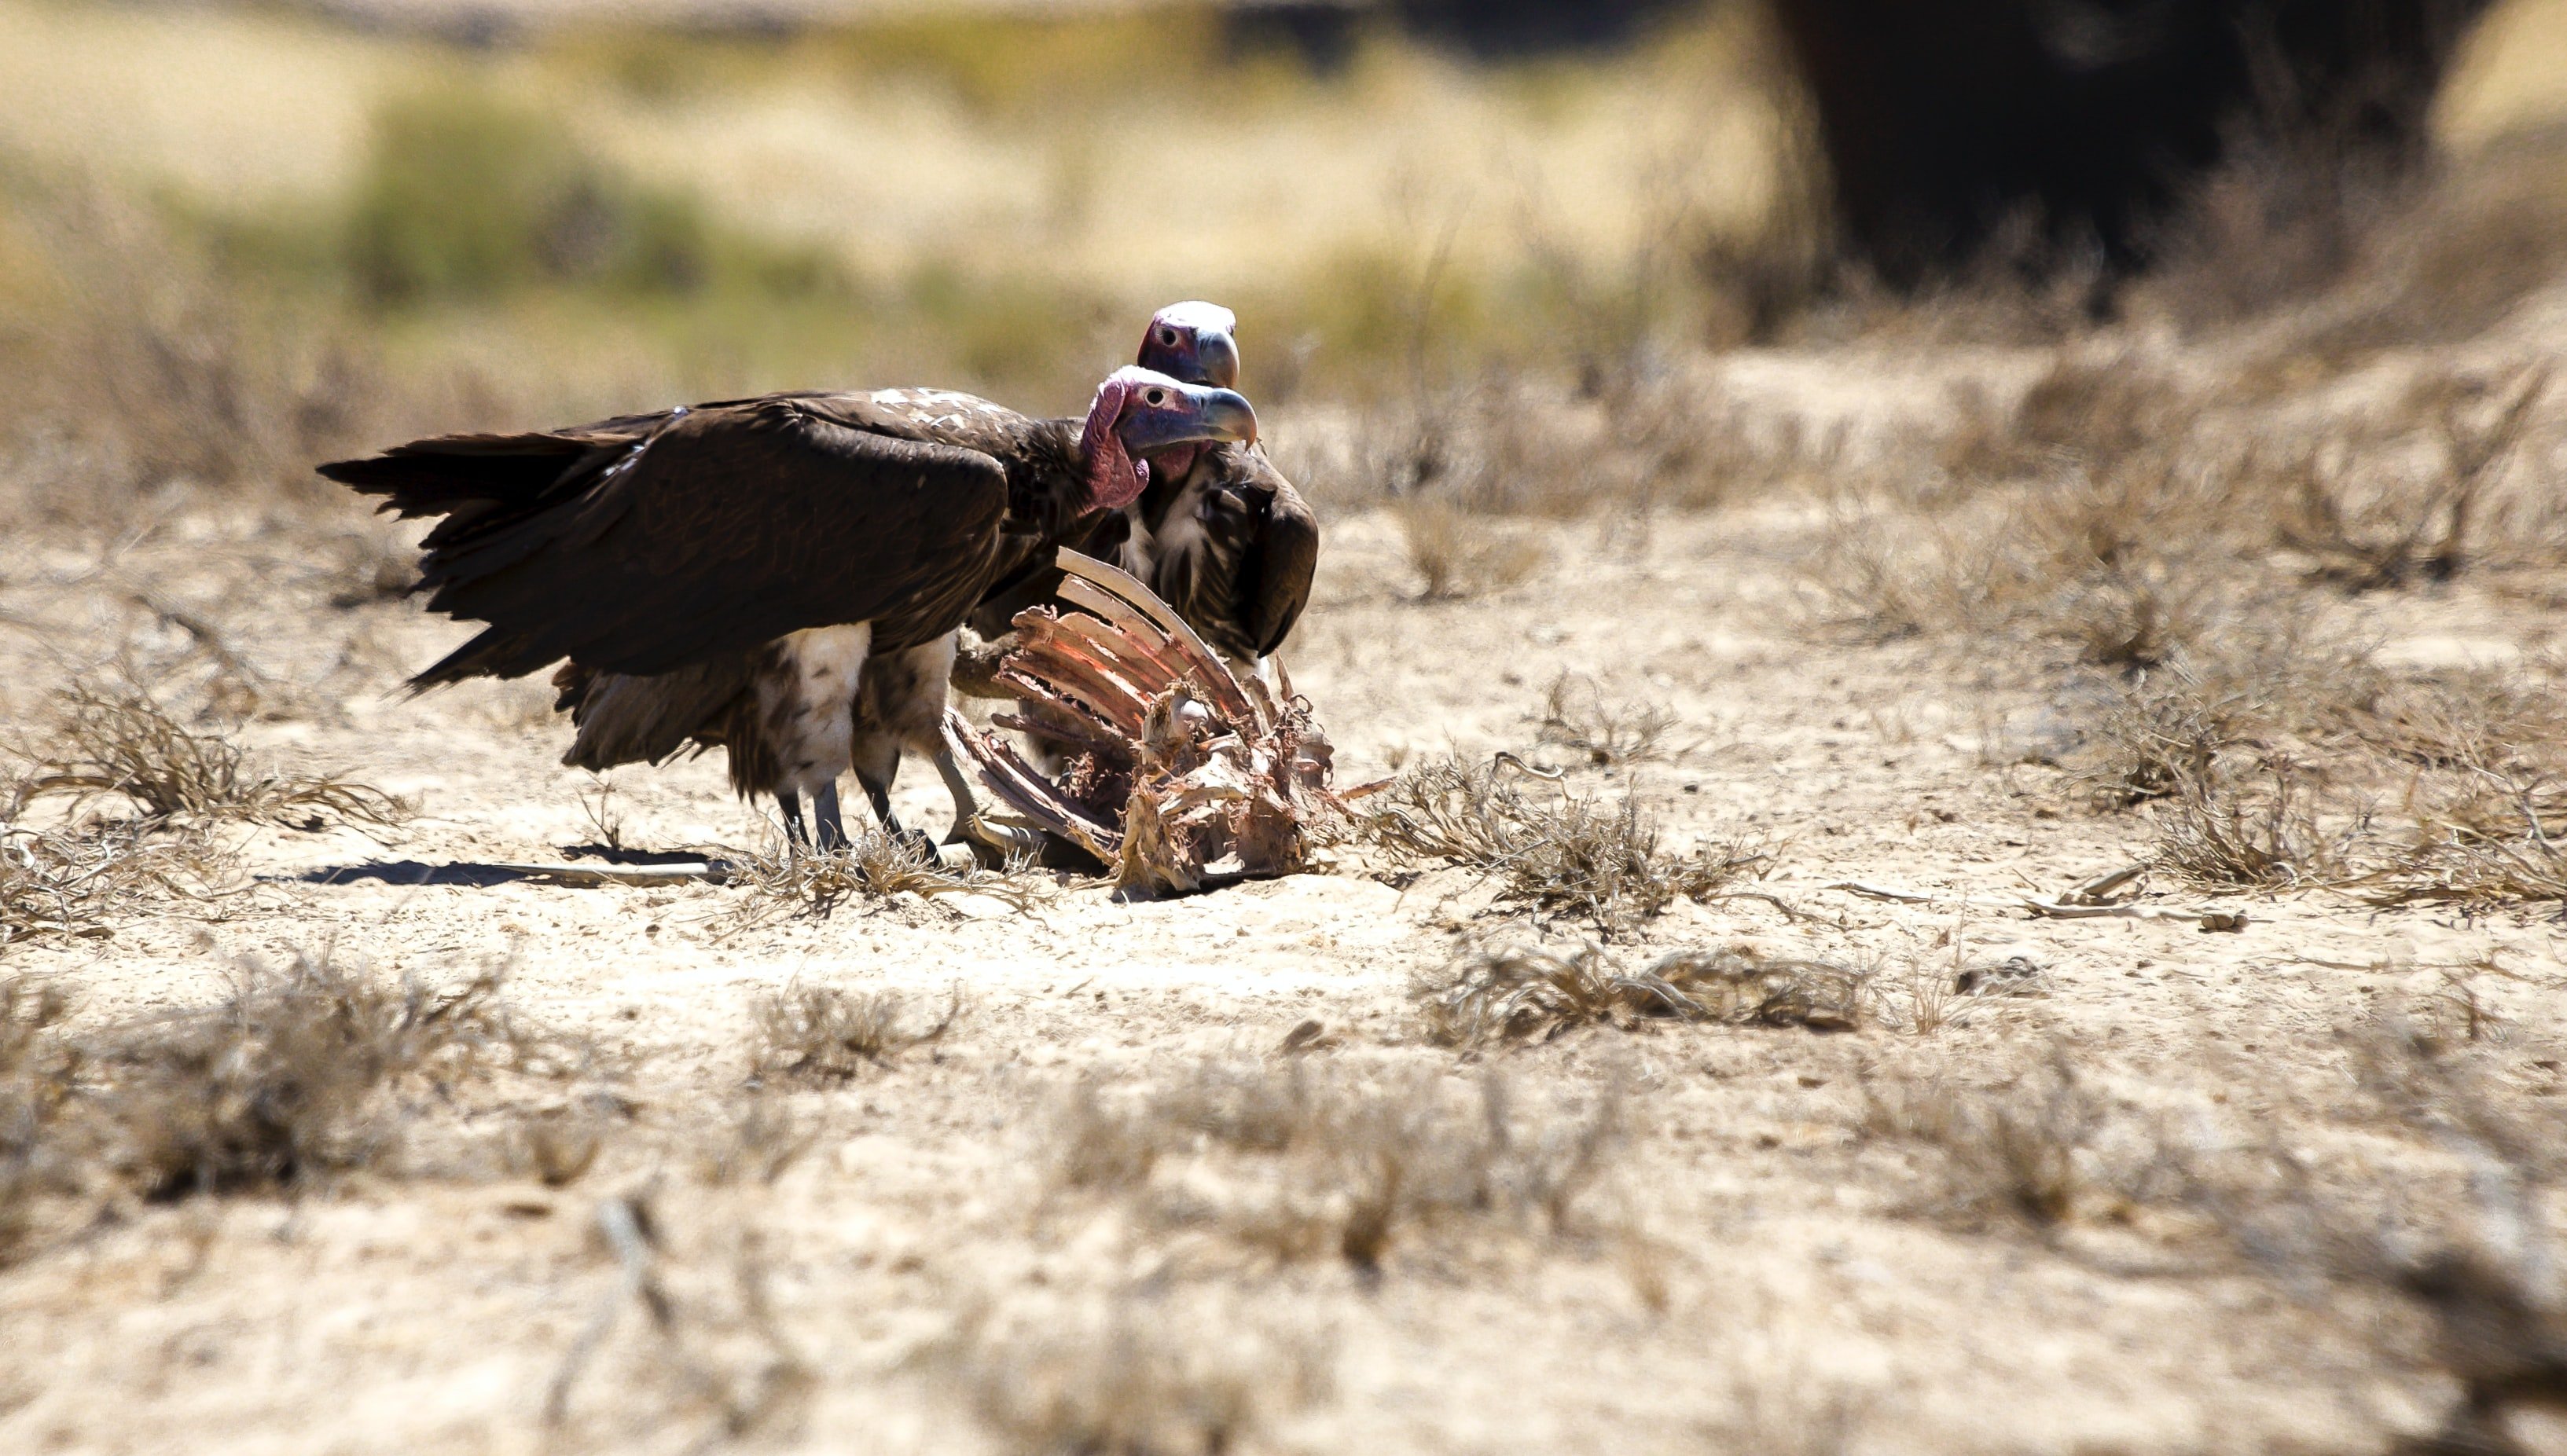 Two lappet-faced vultures